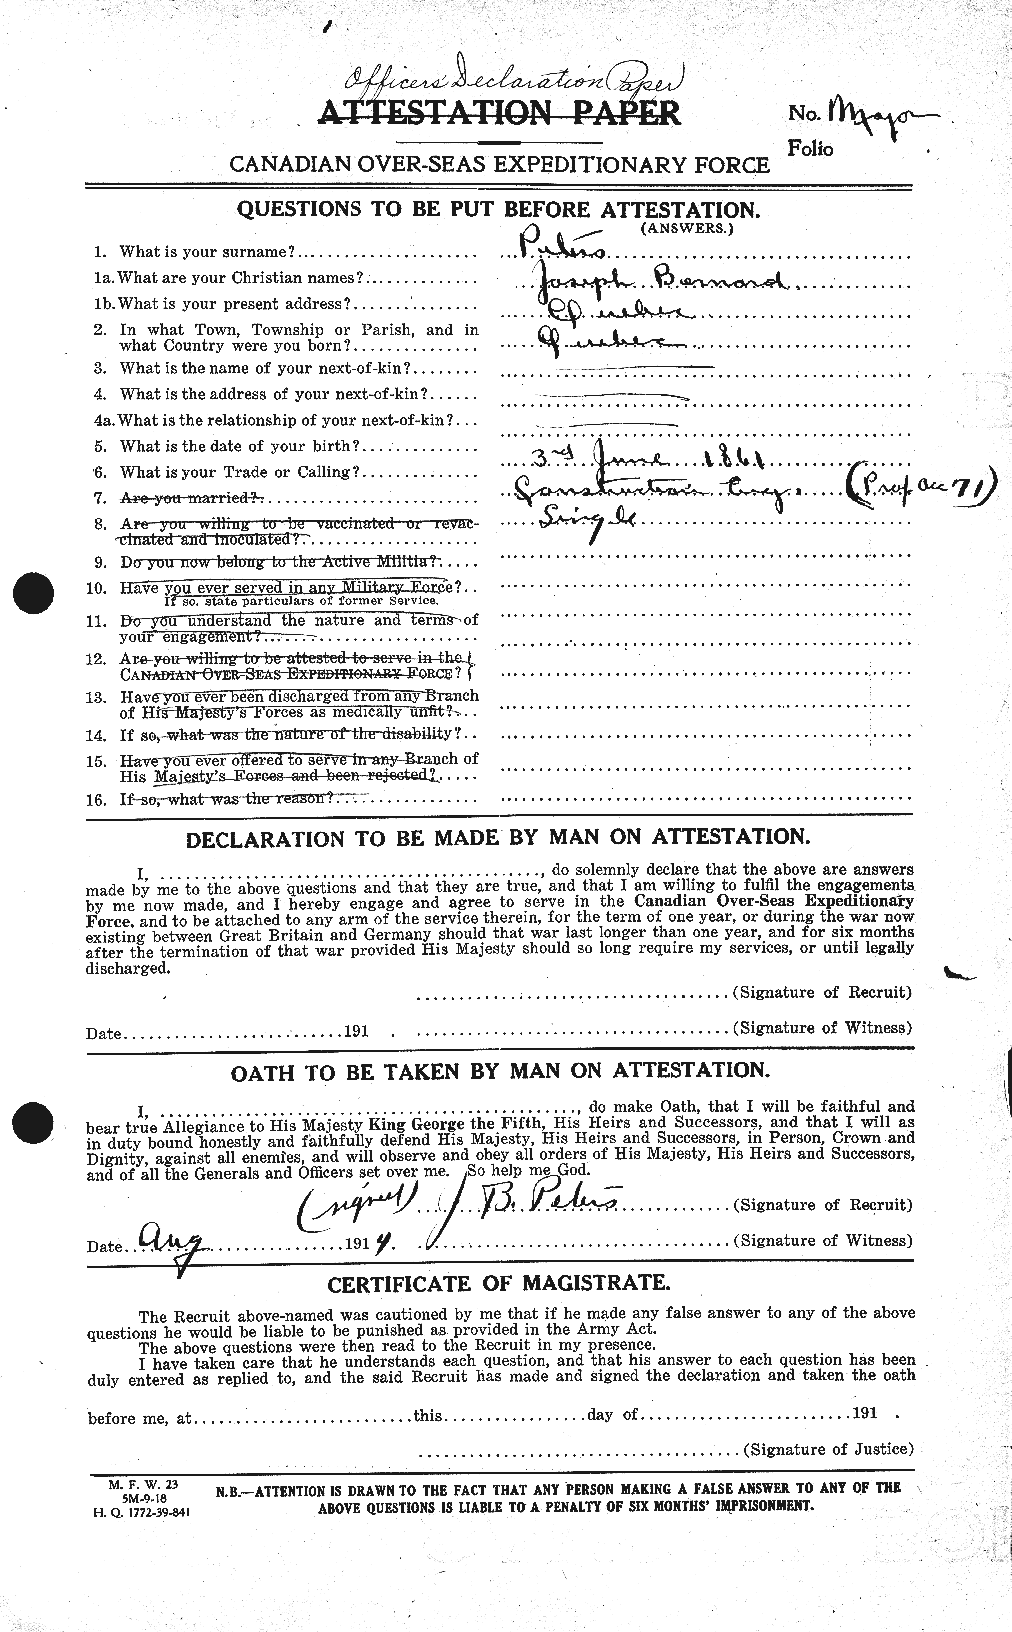 Personnel Records of the First World War - CEF 575559a